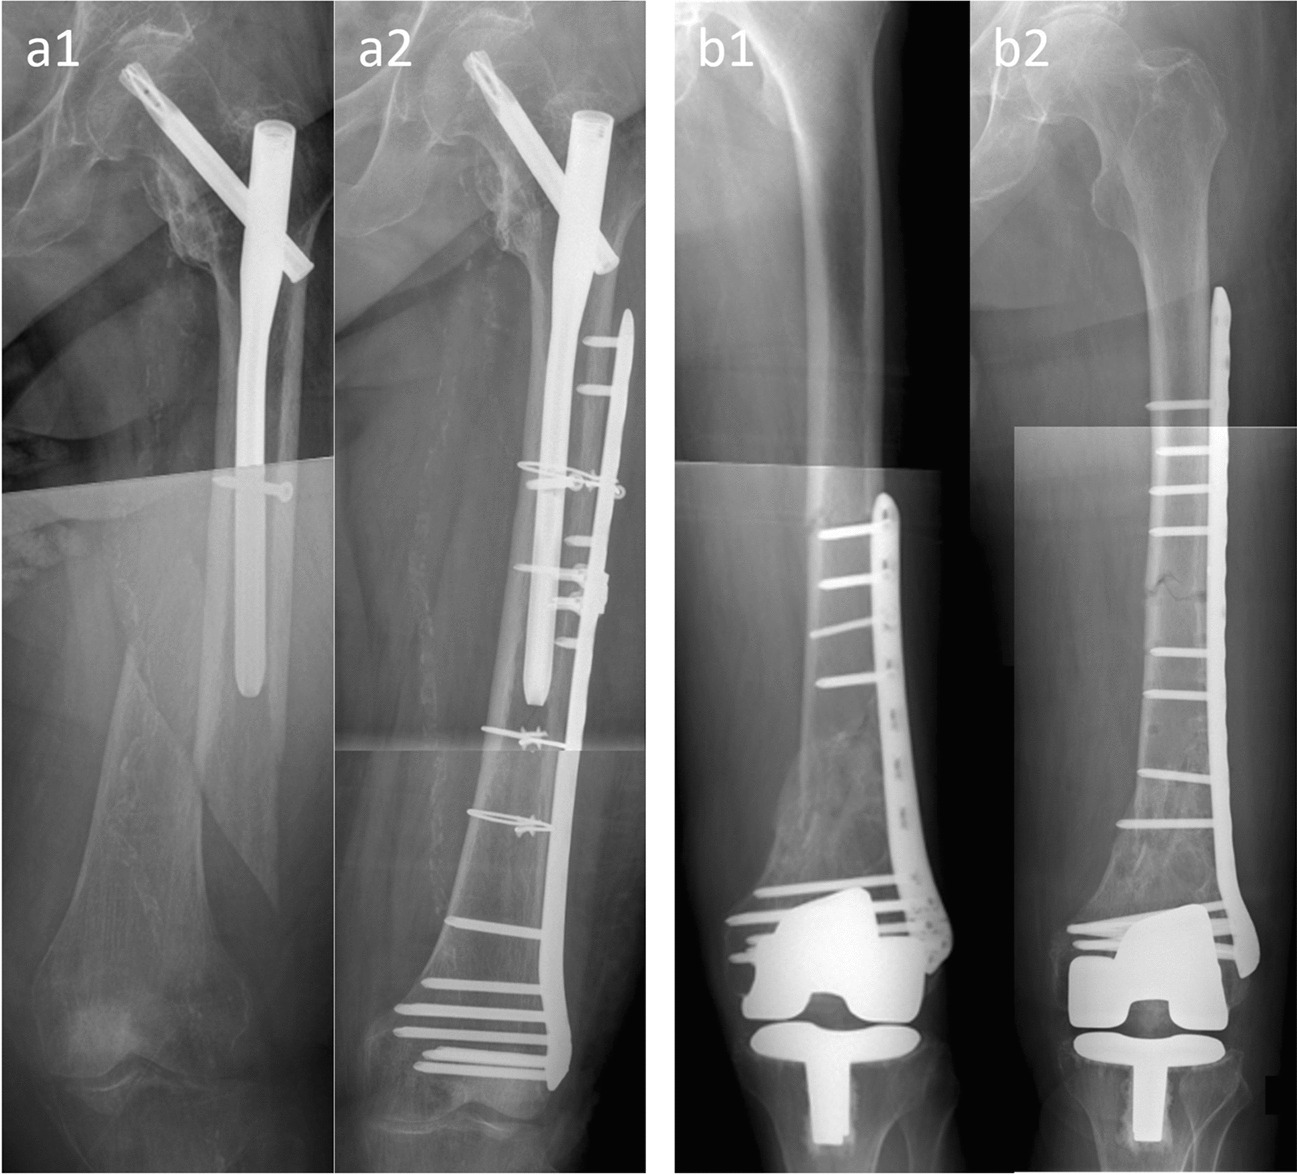 Therapy aspects of peri-implant femoral fractures—a retrospective analysis of 64 patients